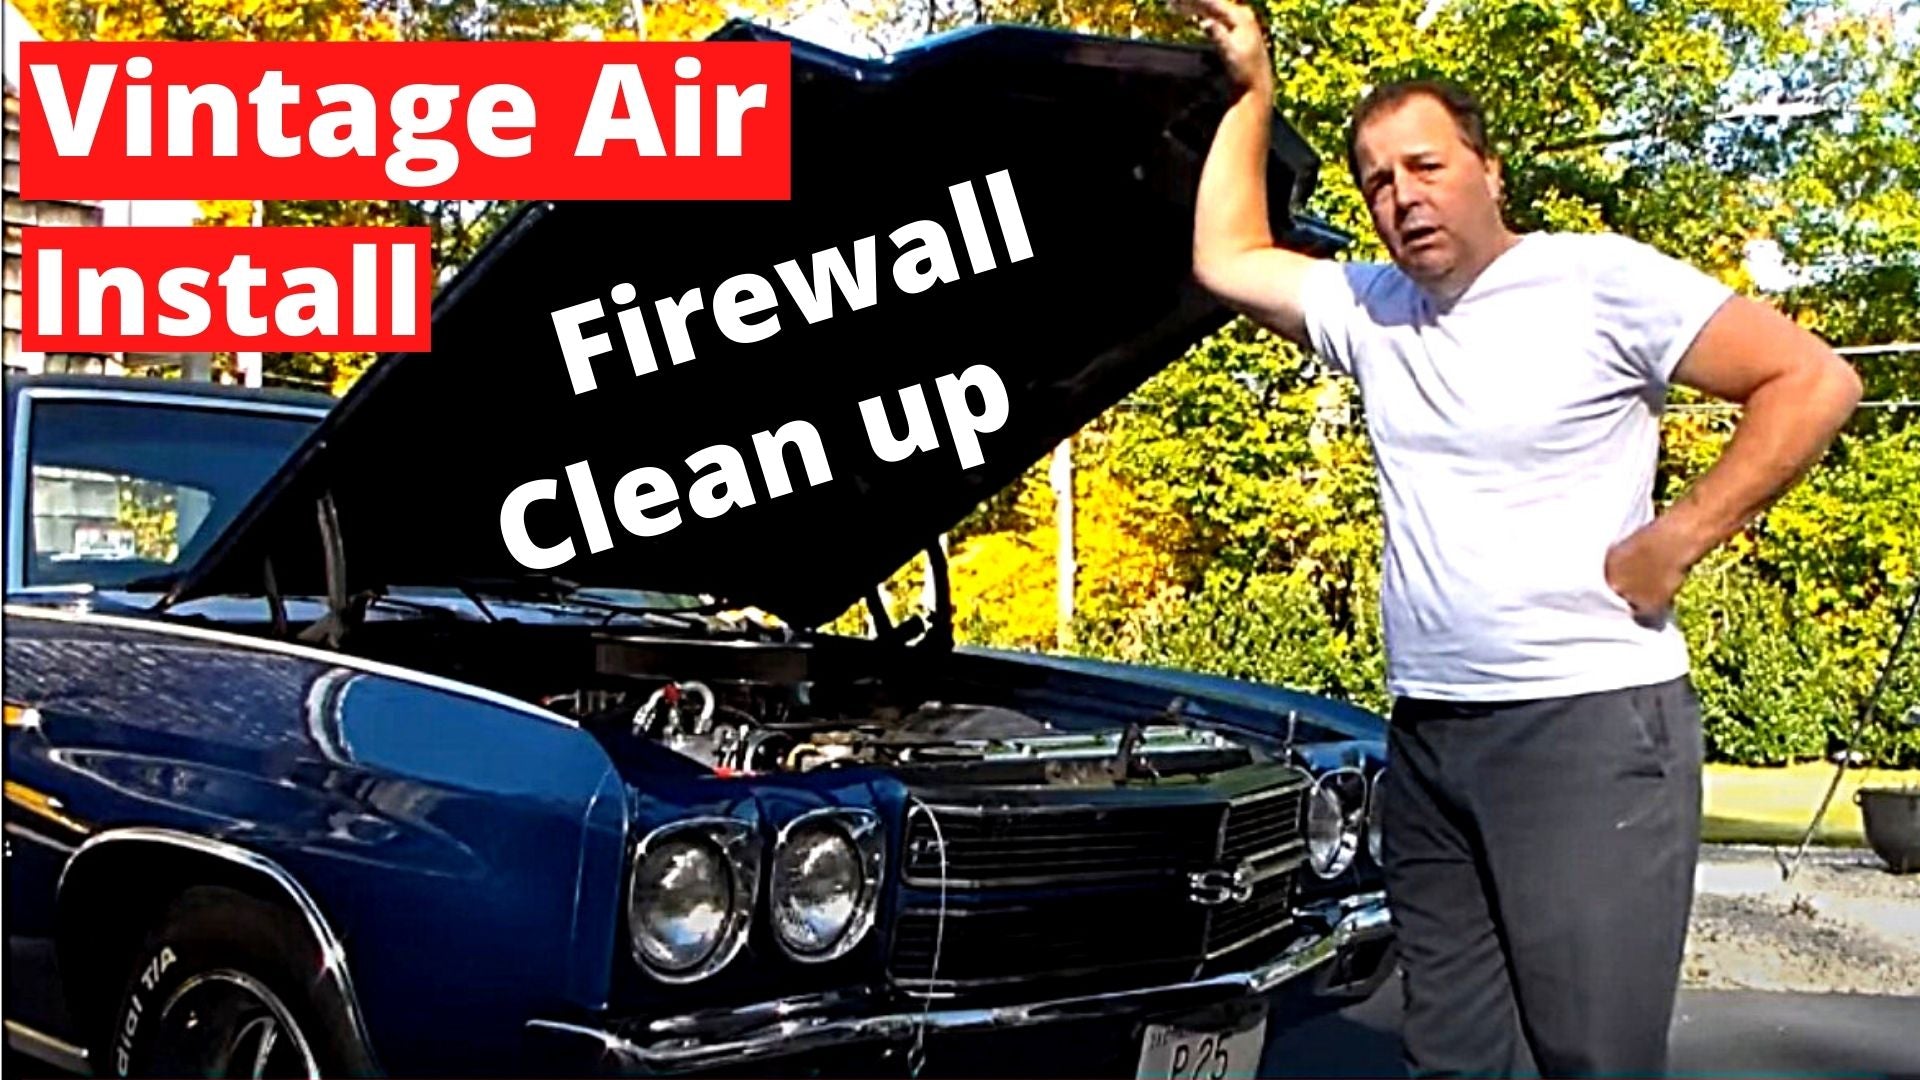 How To Install Vintage Air Firewall Clean Up